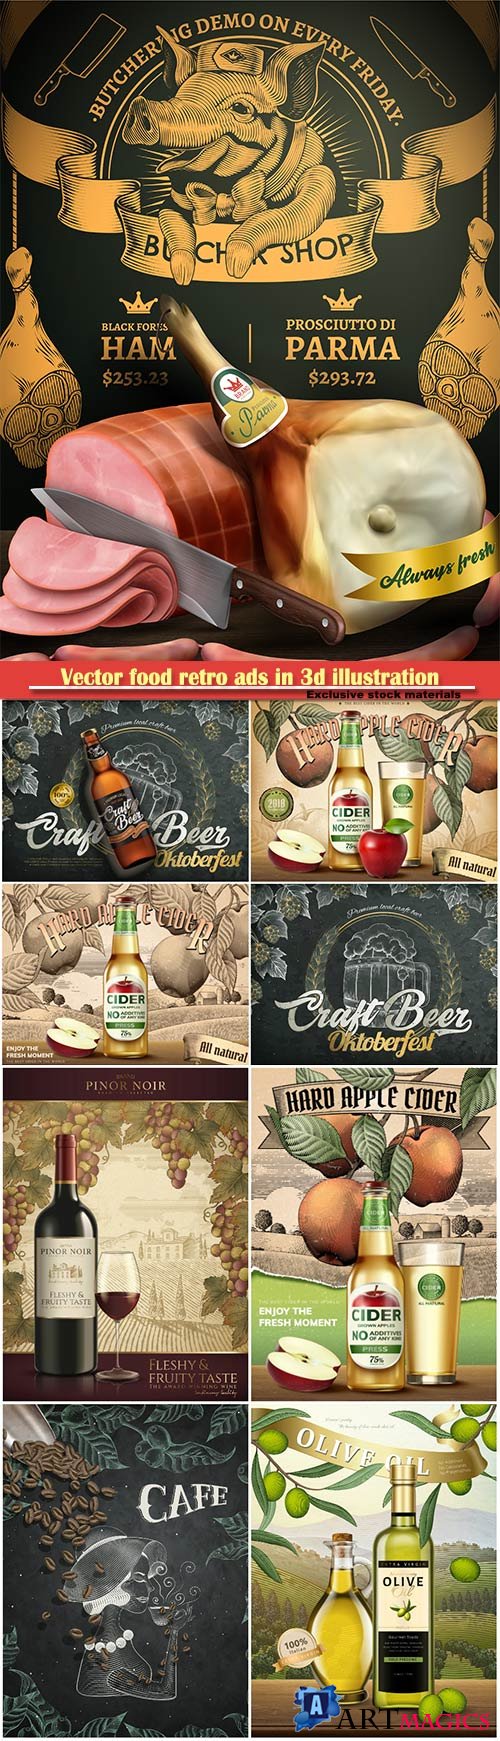 Vector food retro ads in 3d illustration, engraving style background